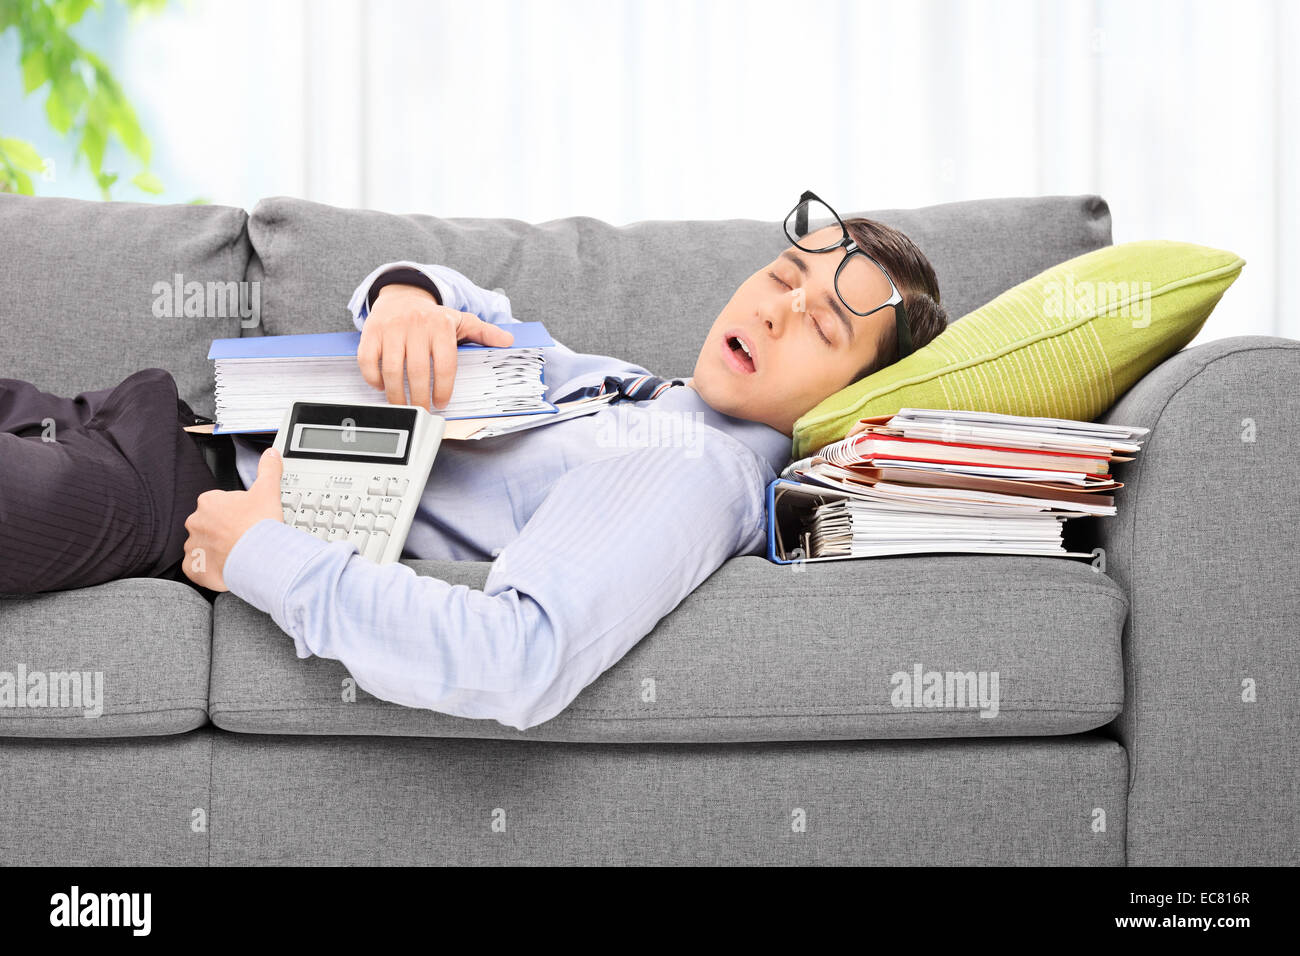 Tired employee sleeping on a sofa in an office on a pile of documents Stock Photo